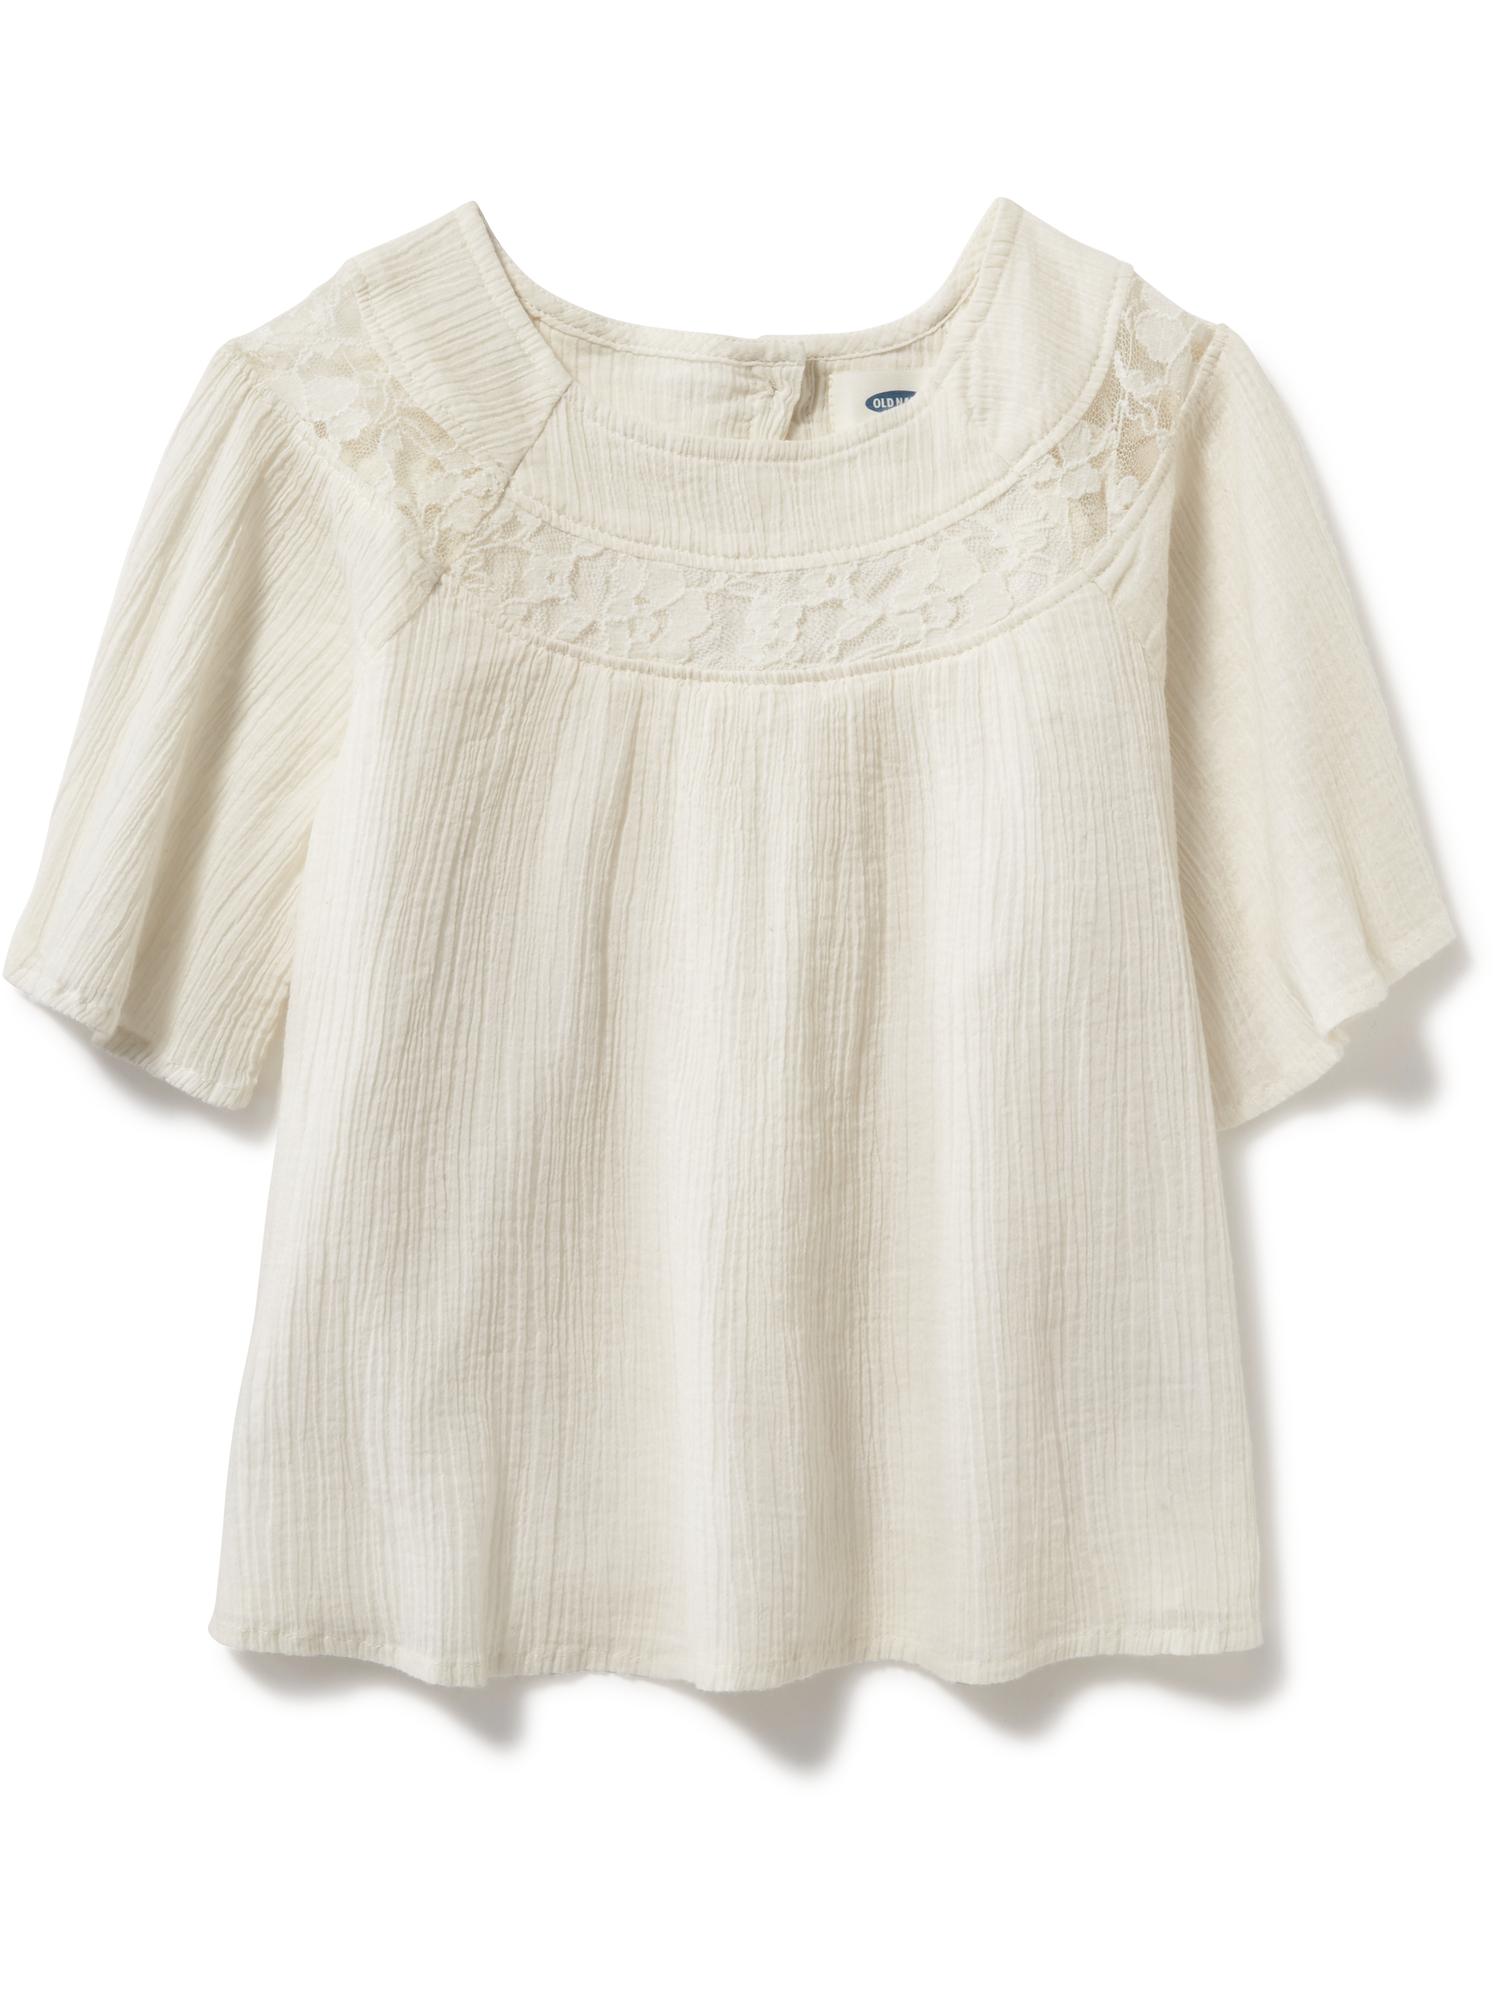 Lace-Yoke Swing Top for Toddler | Old Navy